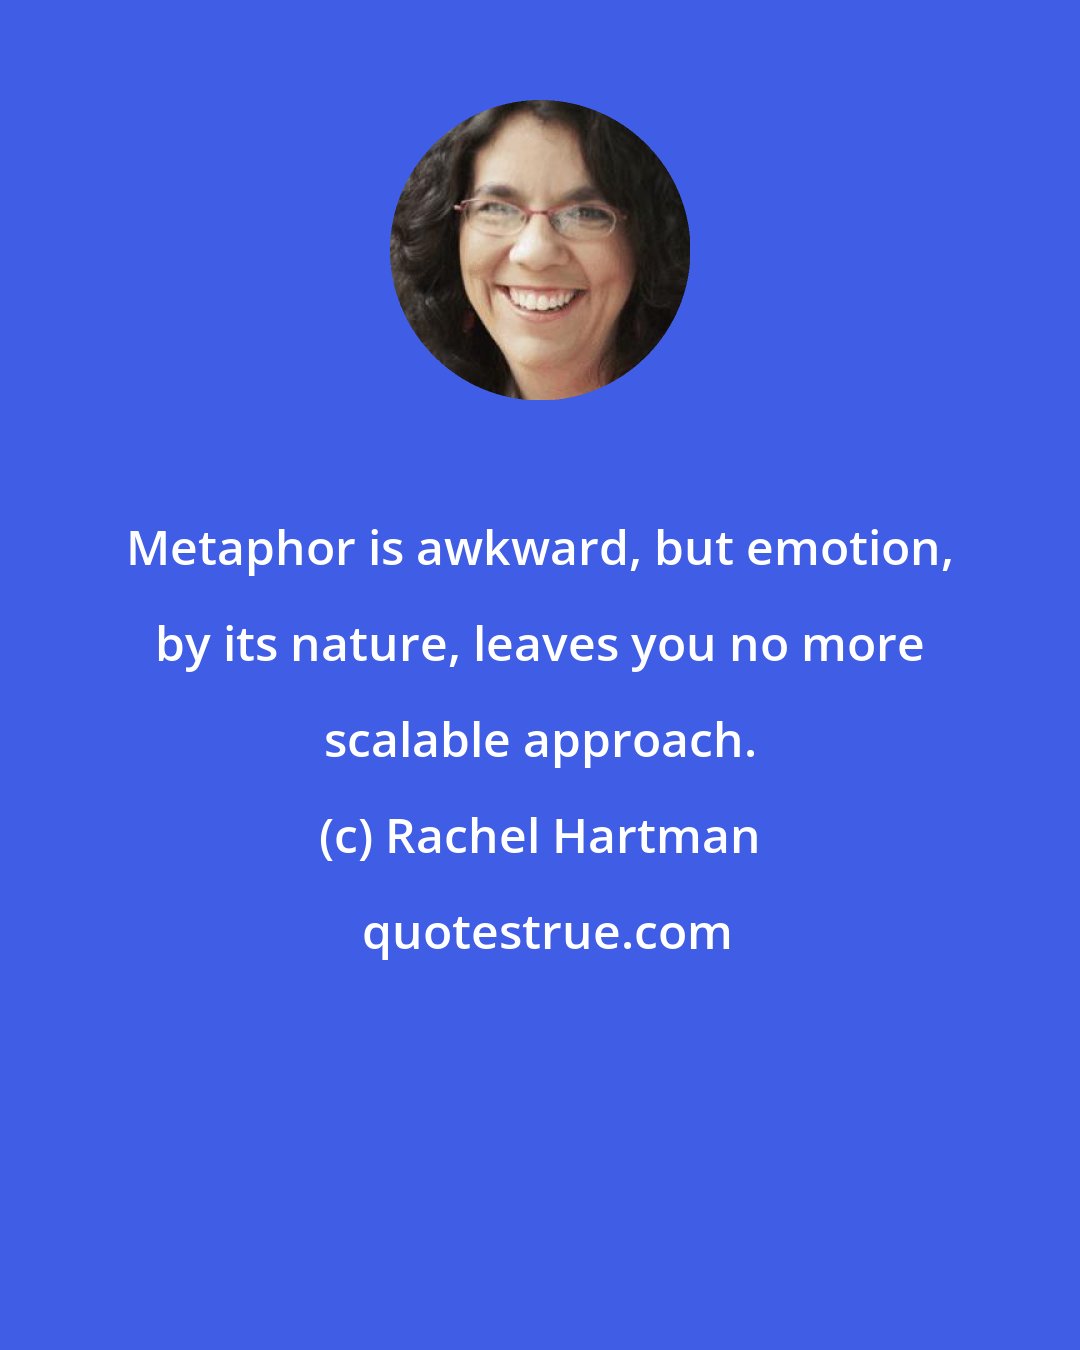 Rachel Hartman: Metaphor is awkward, but emotion, by its nature, leaves you no more scalable approach.